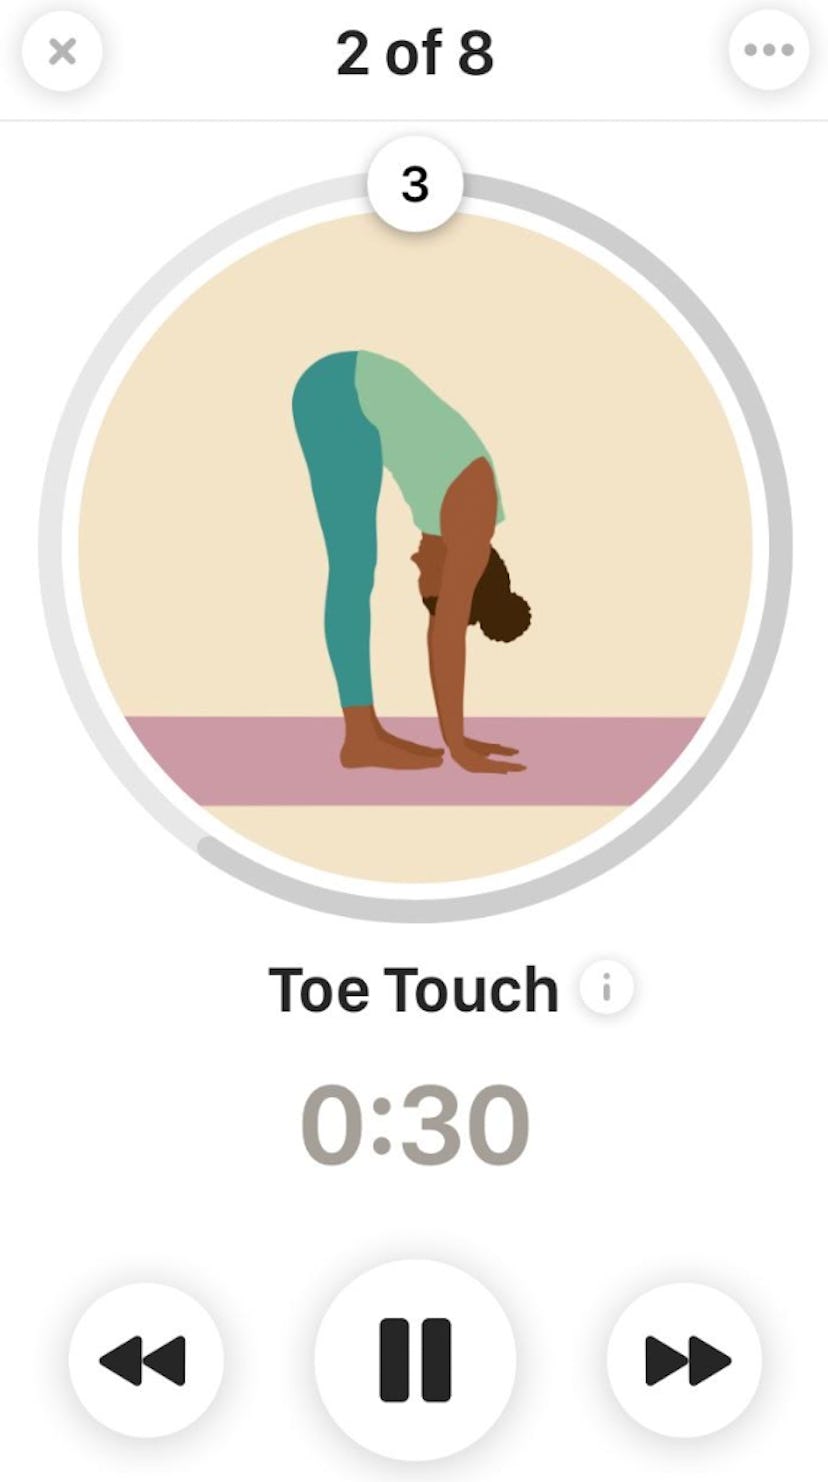 The viral Bend app has been making me more mobile and flexible.